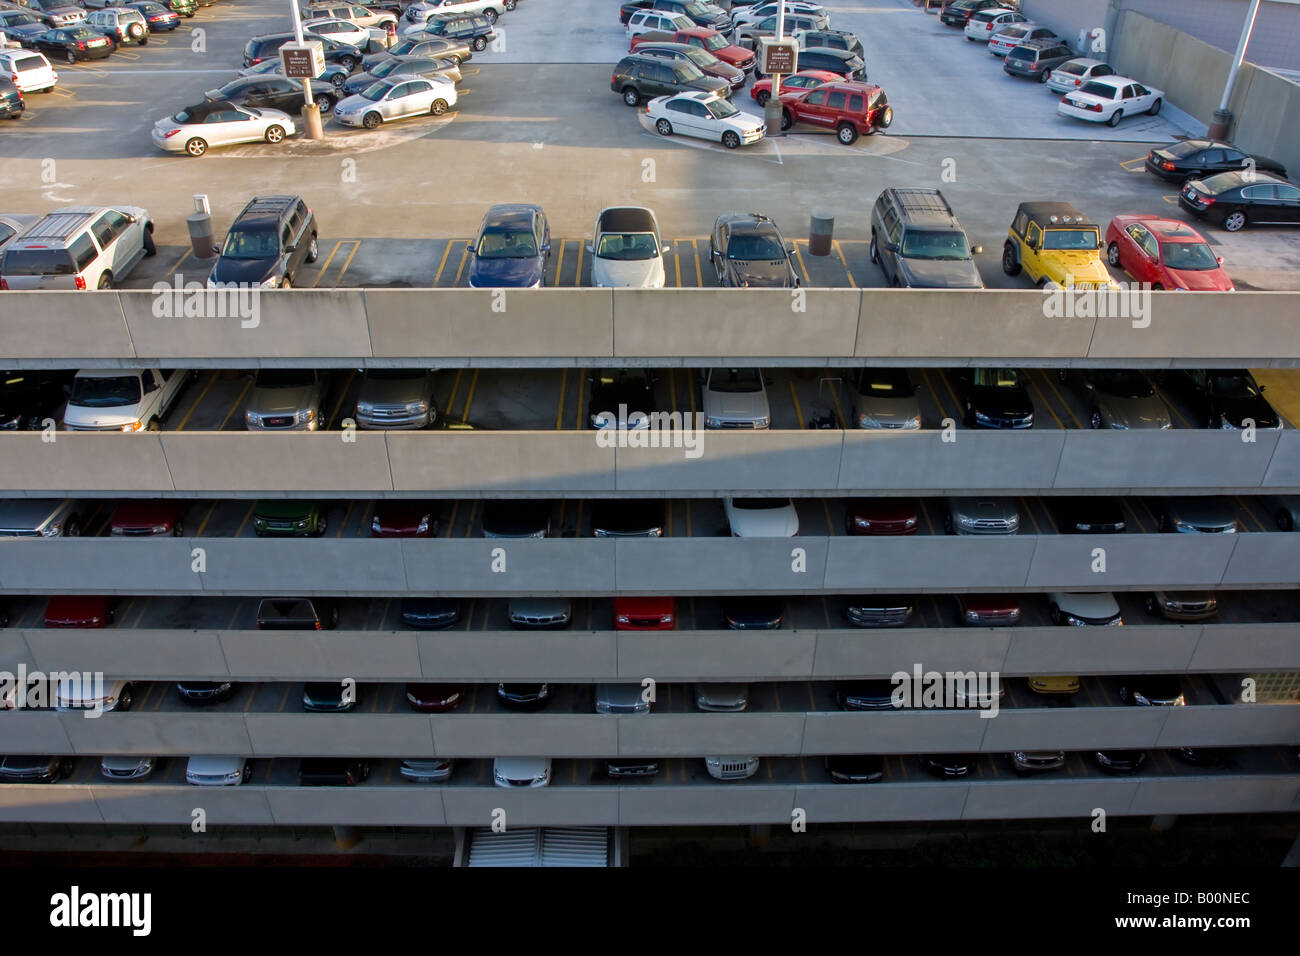 Parking Garage Abstract Stock Photo